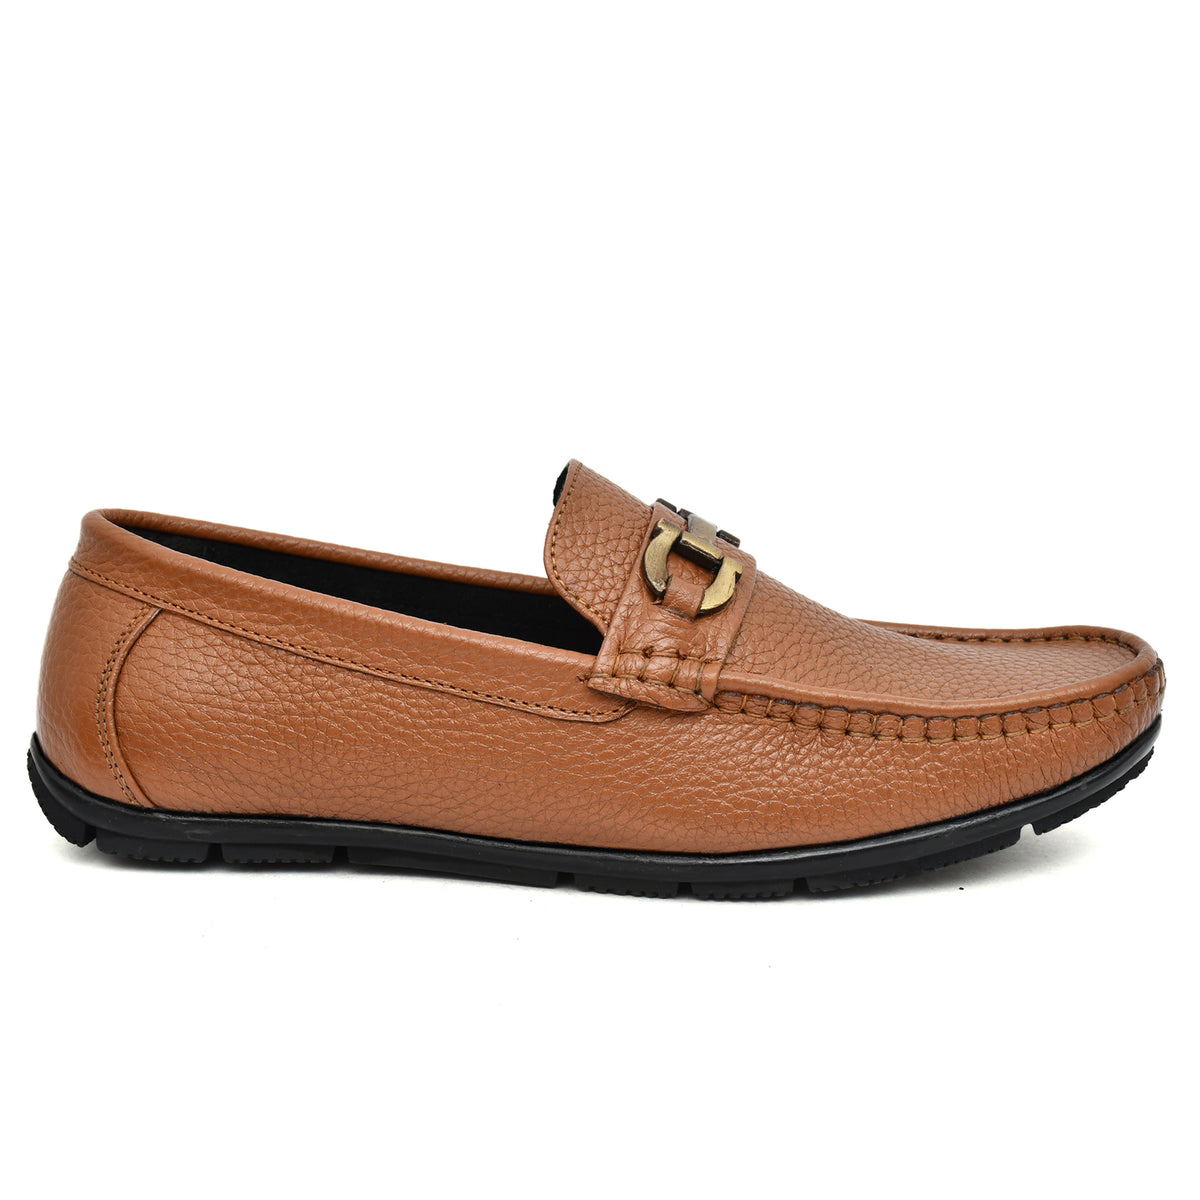 CM Buckled Leather Loafers for men's